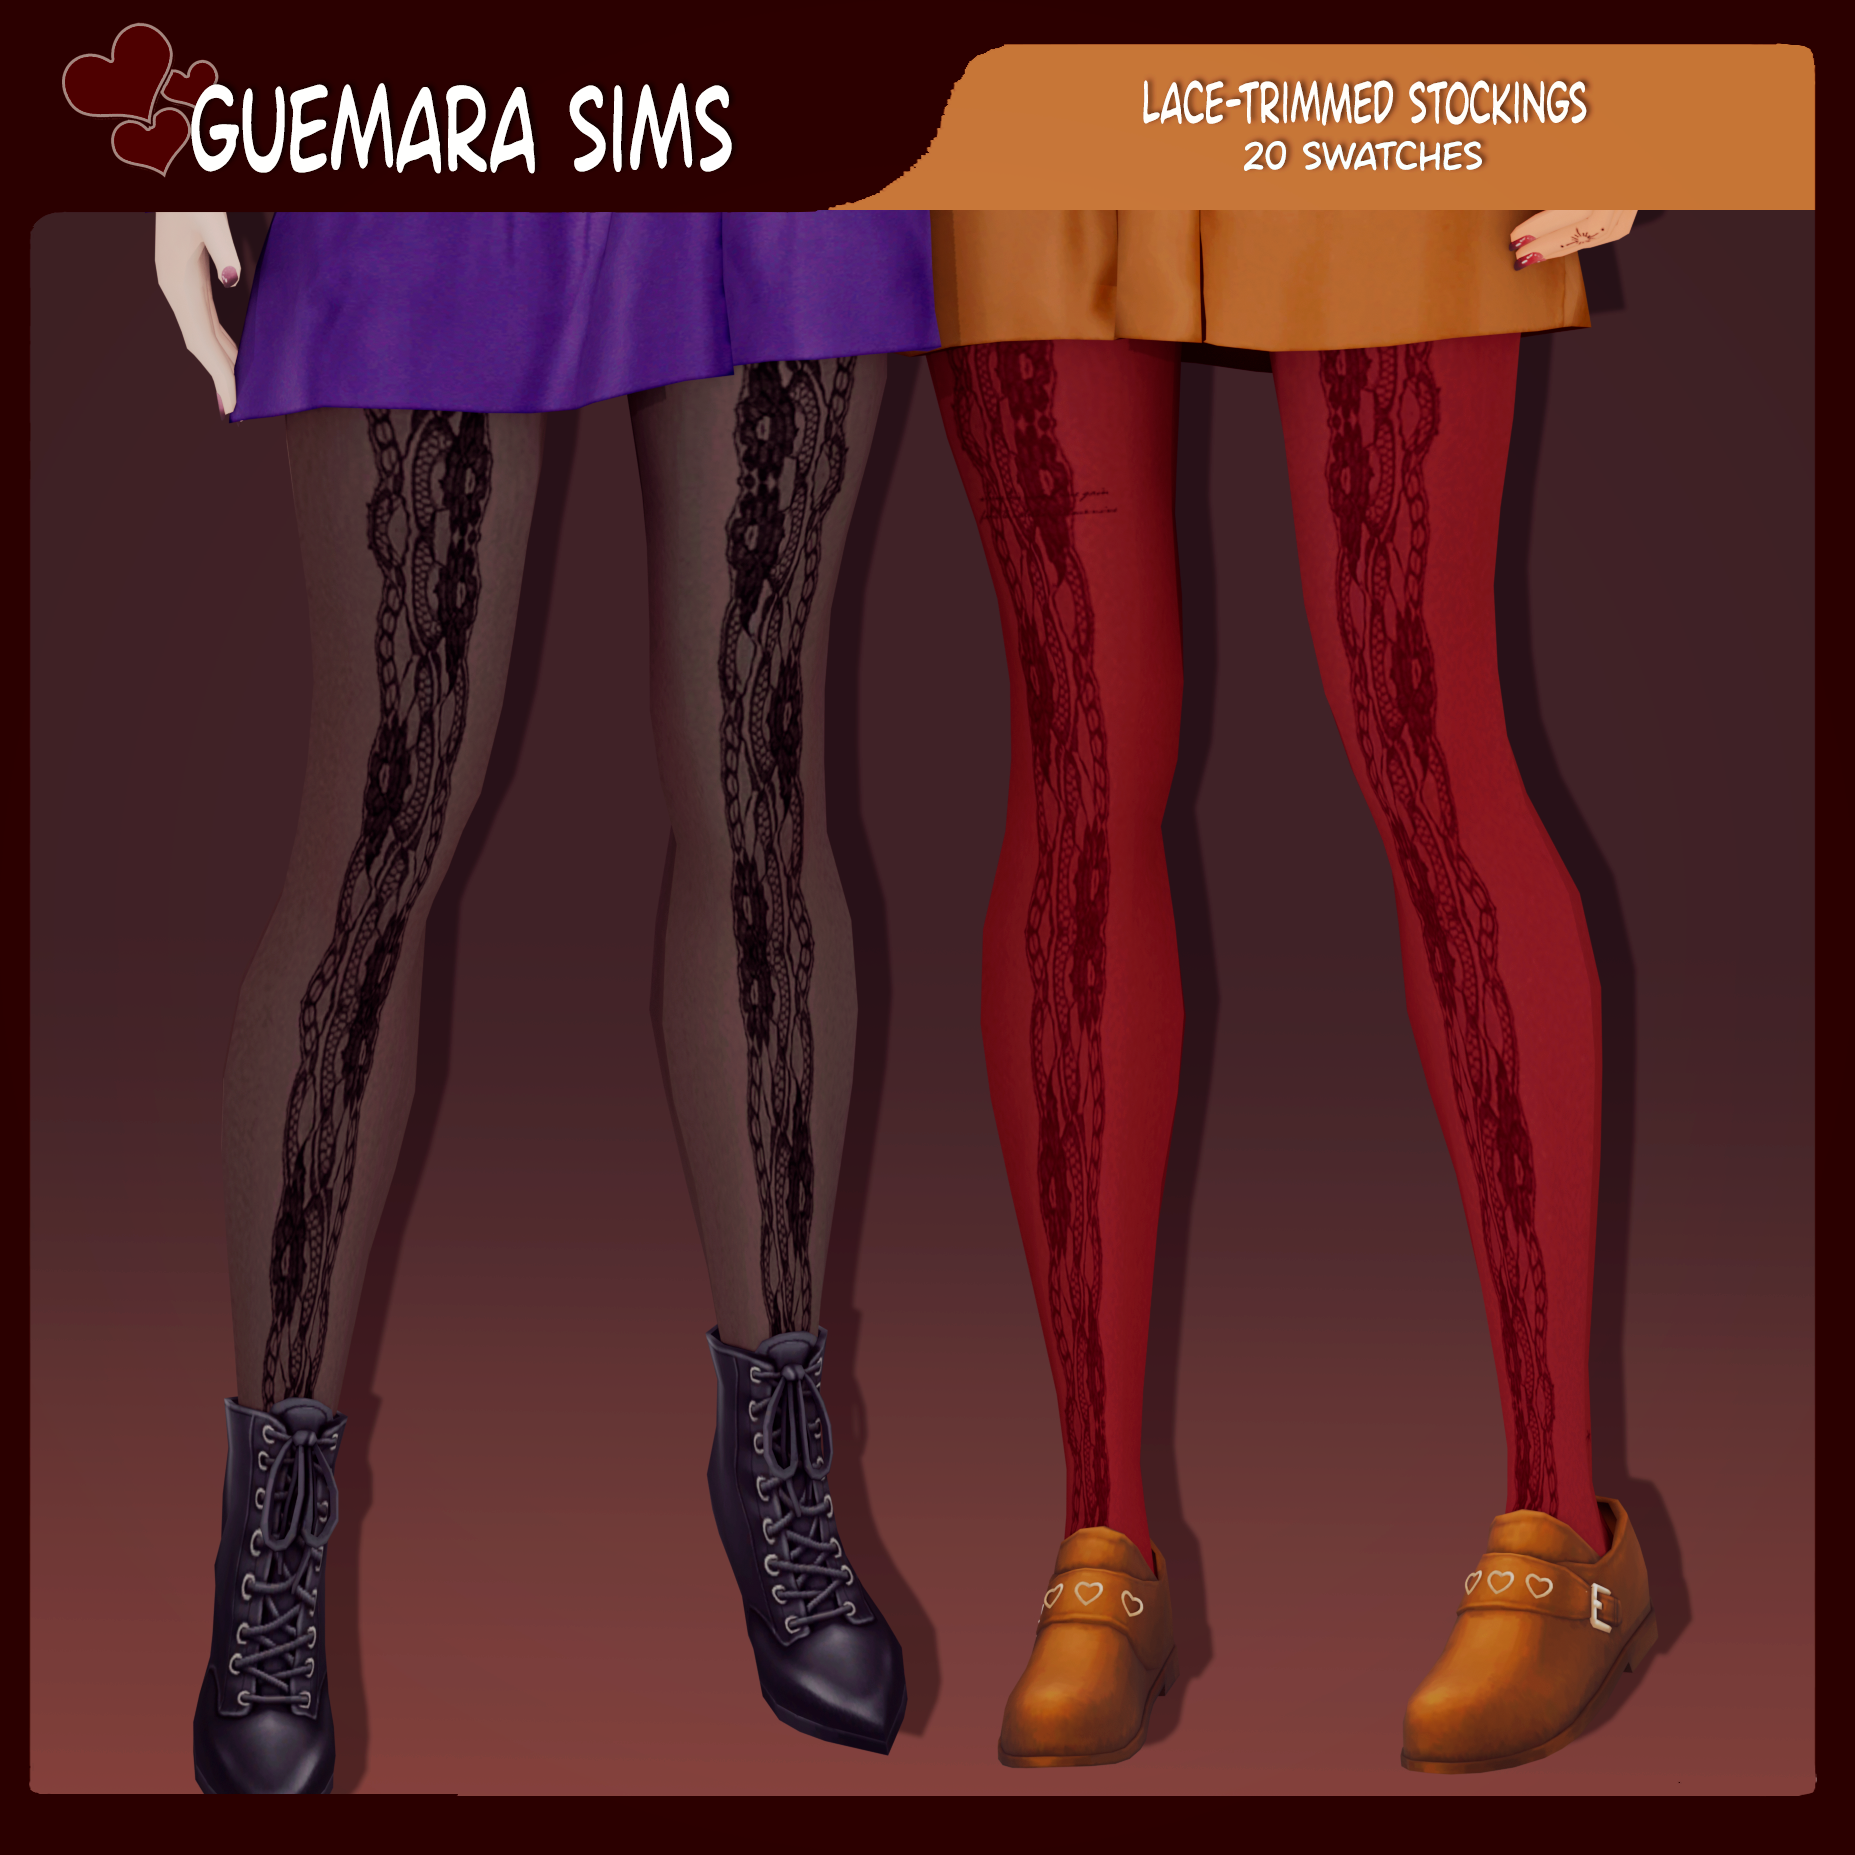 Lace-trimmed stockings - The Sims 4 Create a Sim - CurseForge